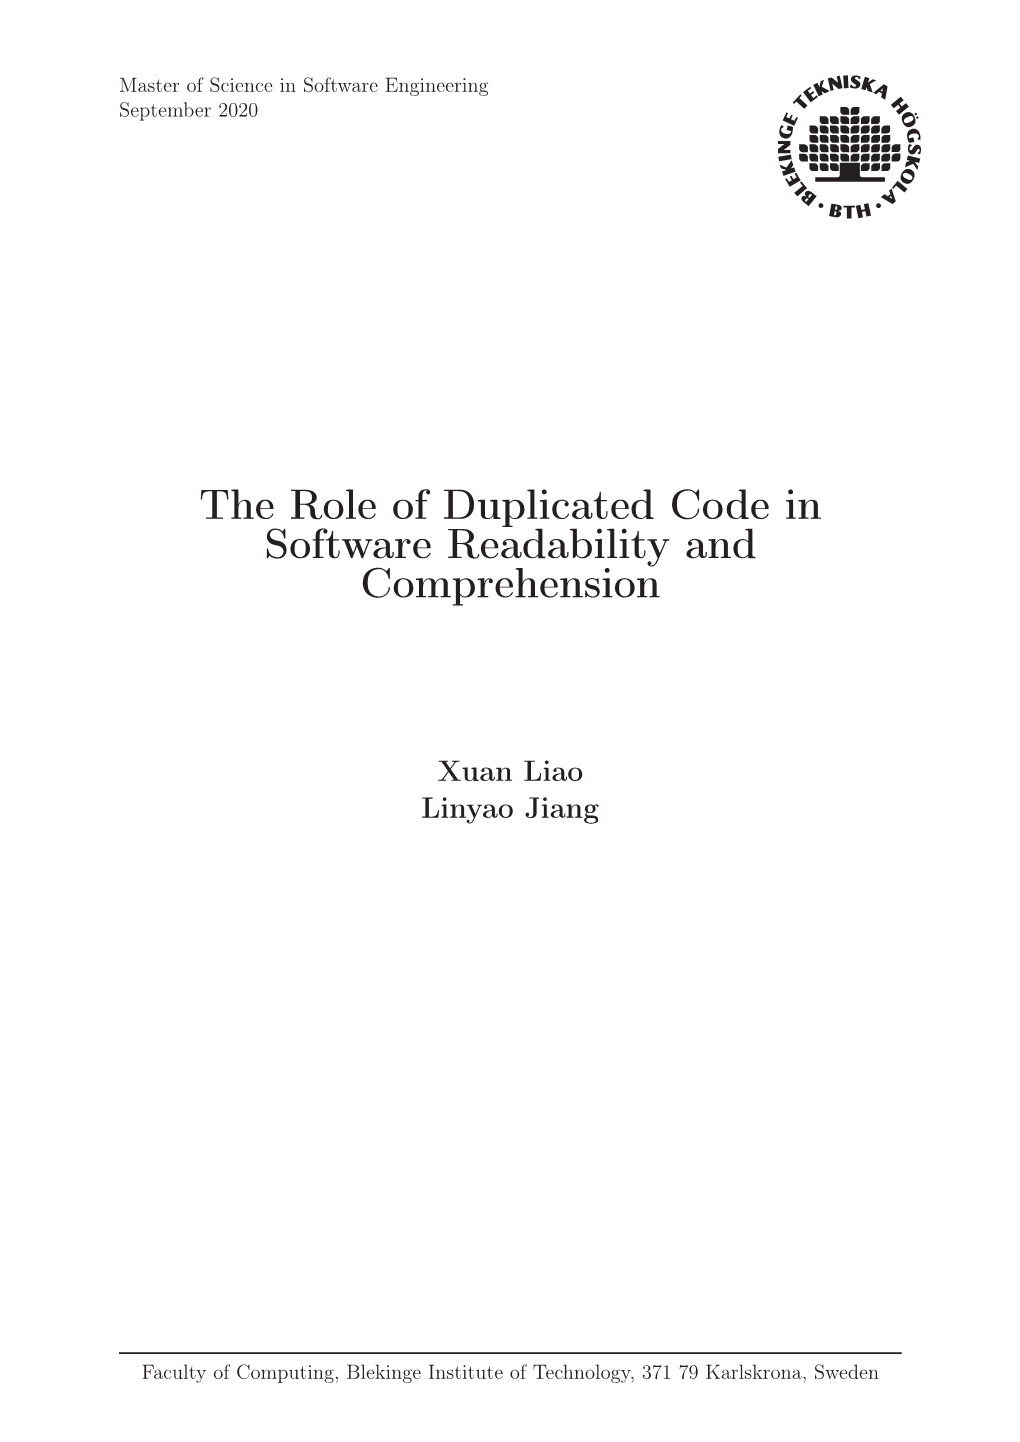 The Role of Duplicated Code in Software Readability and Comprehension